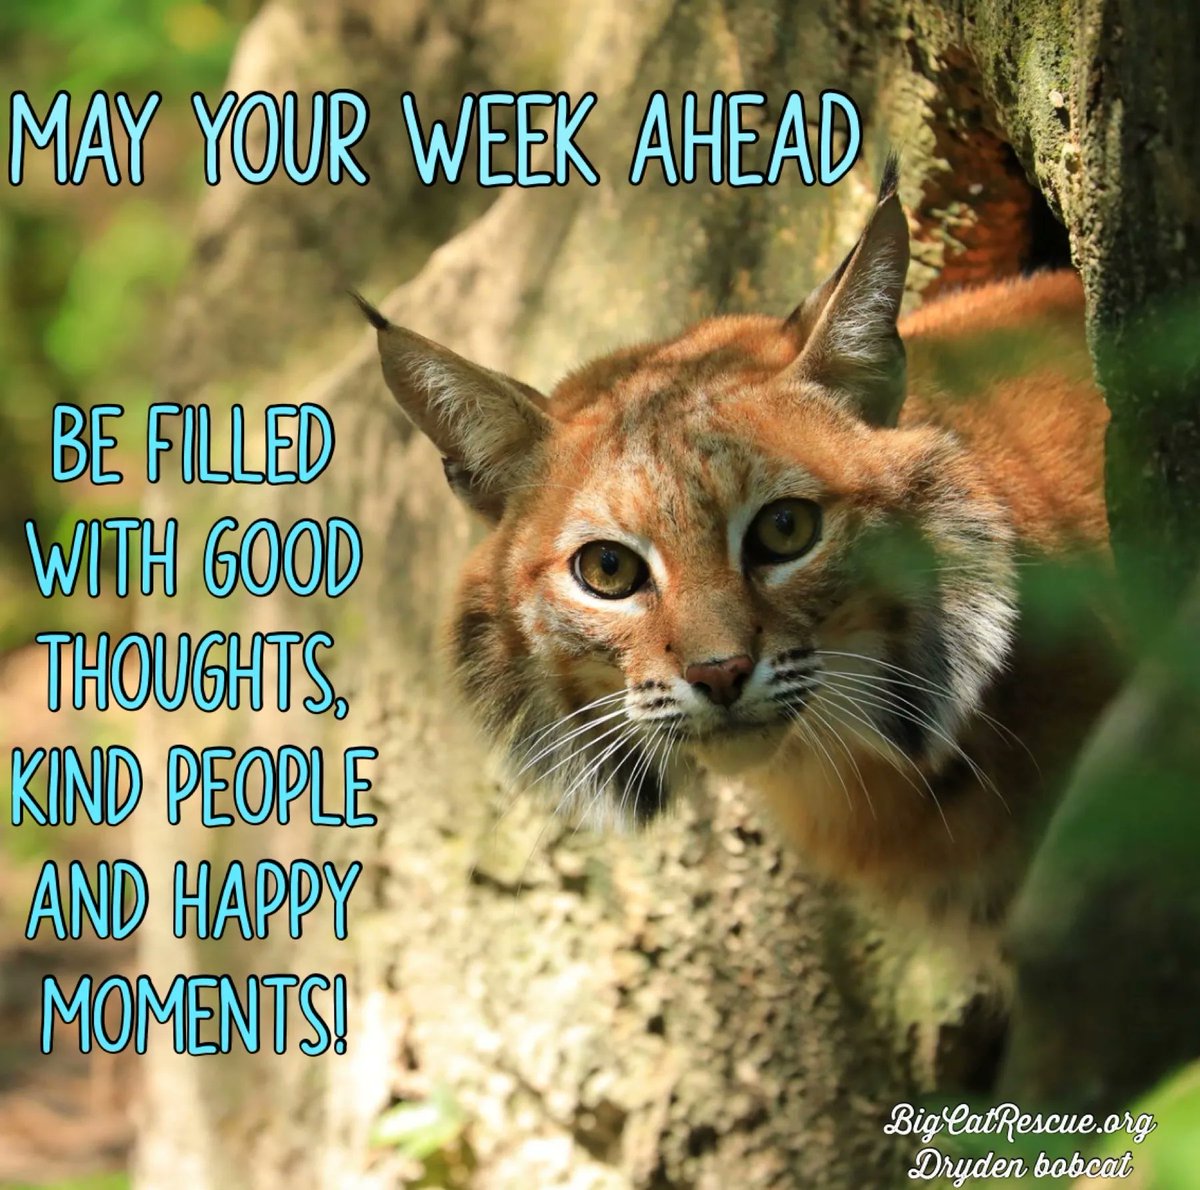 “May your week ahead be filled with good thoughts, kind people and happy moments!”

#DrydenBobcat #BigCats #BigCatRescue #Rescue #Tiger #Bobcat #Kindness #KindnessMatters #Cats #Inspiration #InspirationalQuotes #Life #CaroleBaskin